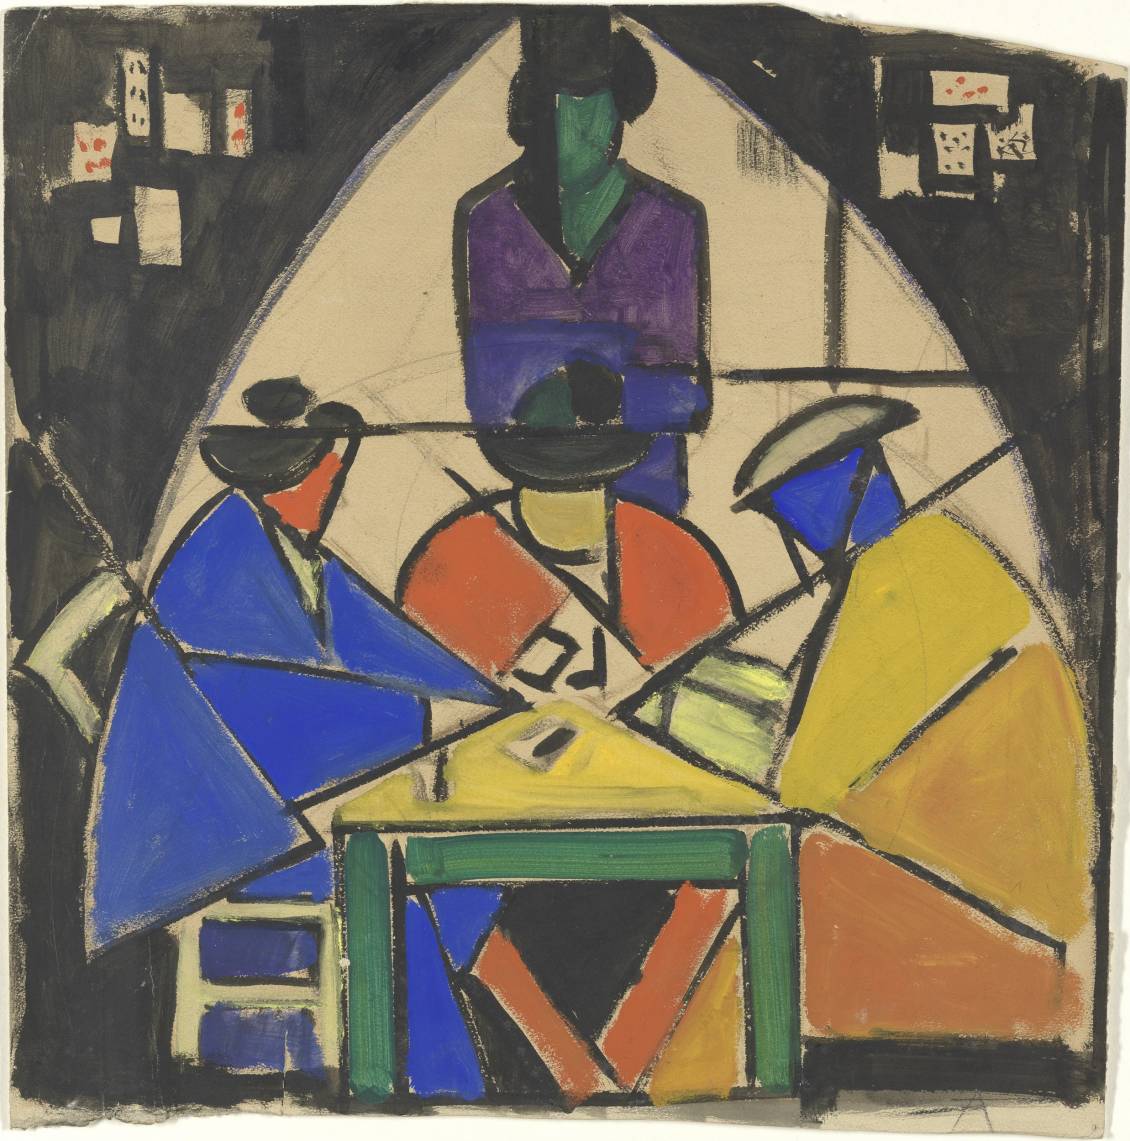 Theo van Doesburg, Study for the card players, 1916